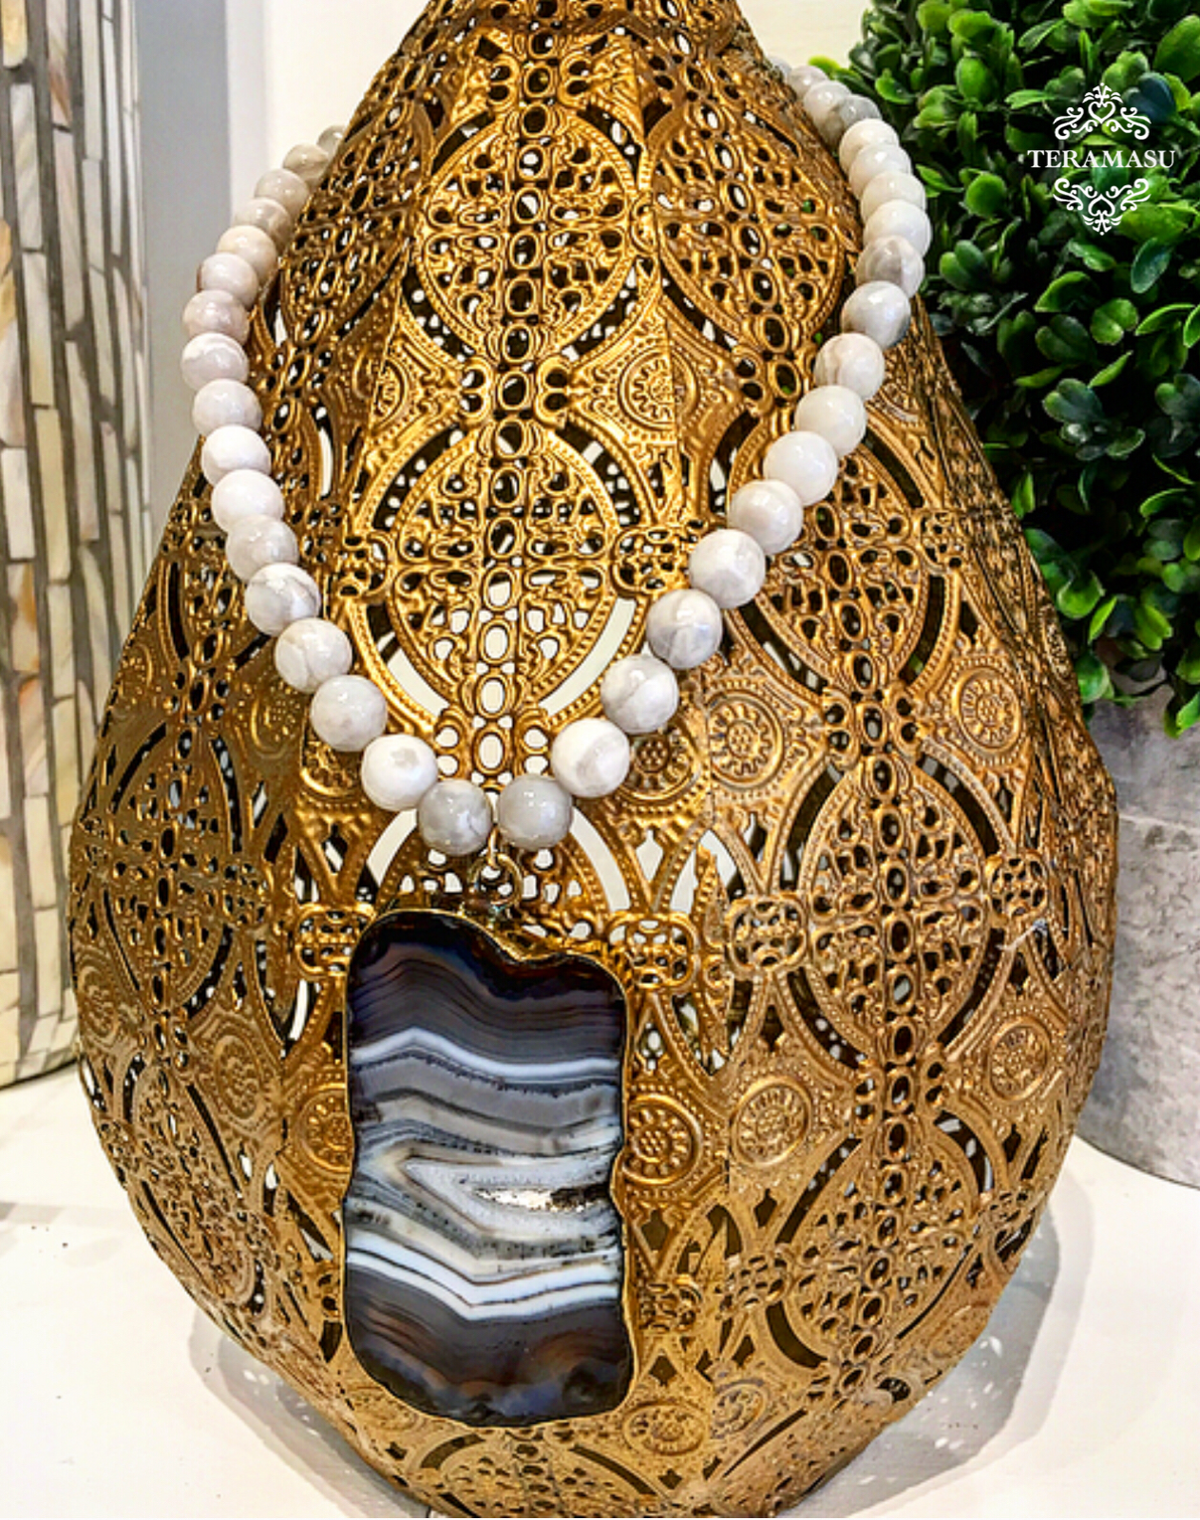 Living Ladylike: Gorgeous & New Teramasu Moonstone and One of a Kind Stone Pendant Necklace